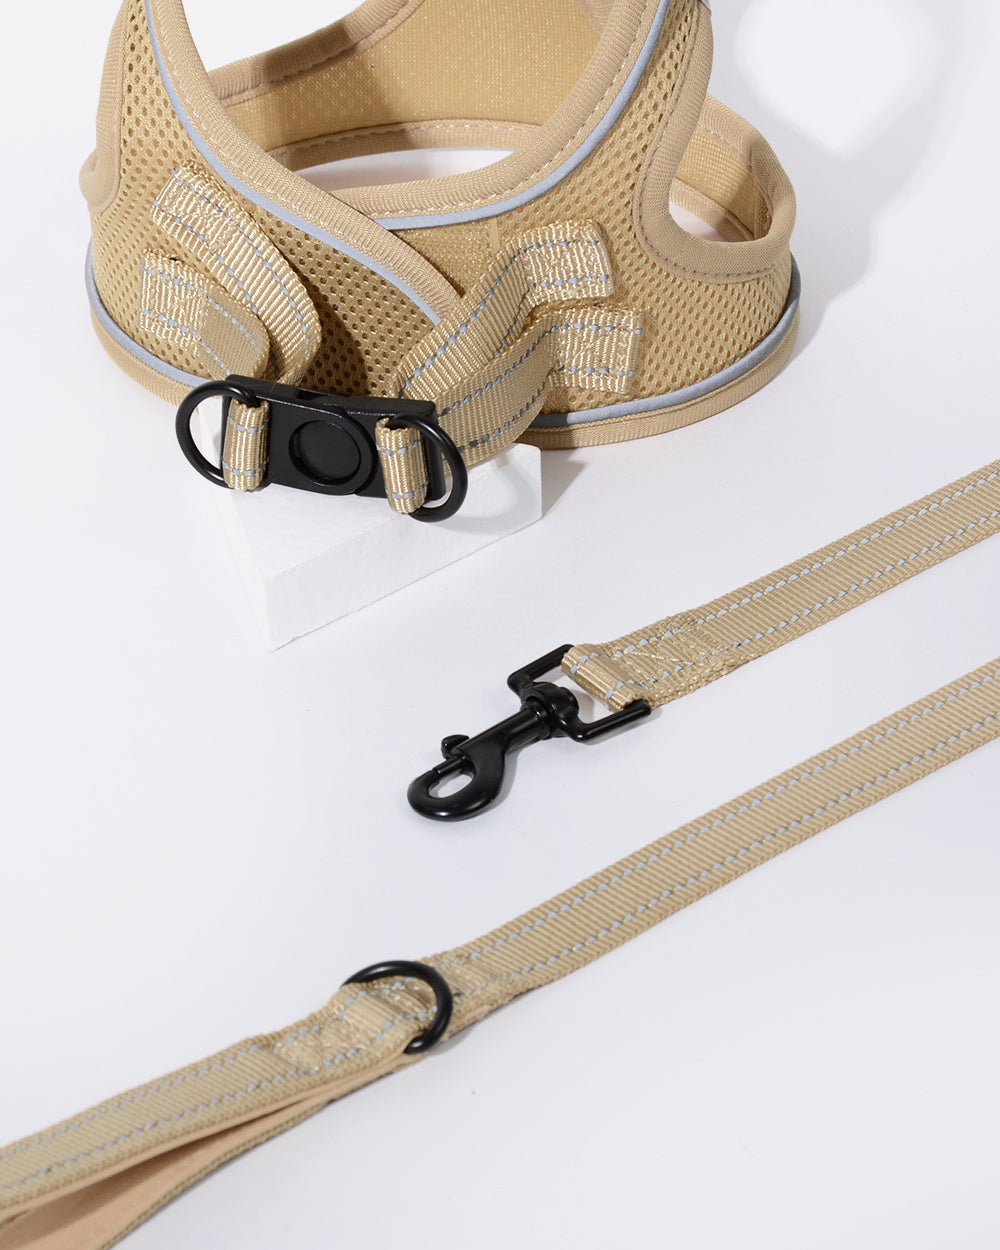 OxyMesh Velcro Step-in Harness and Leash Set - Tan